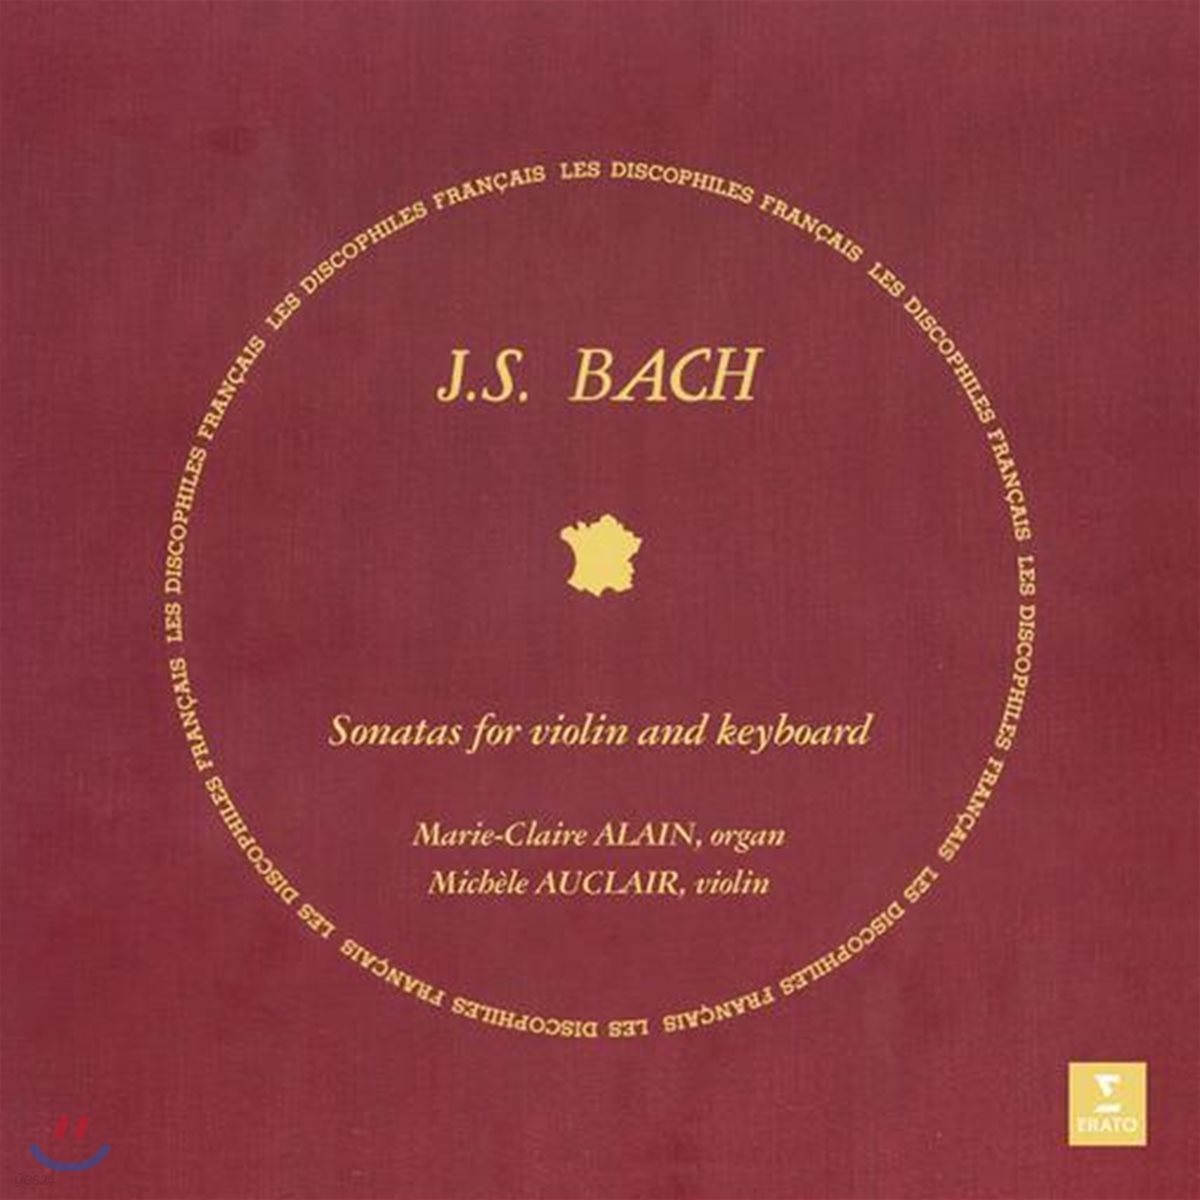 Michele Auclair / Marie-Claire Alain 바흐: 바이올린 소나타 [오르간 반주] (Bach: Sonatas for Violin and Keyboard Nos. 1-6) [2LP]